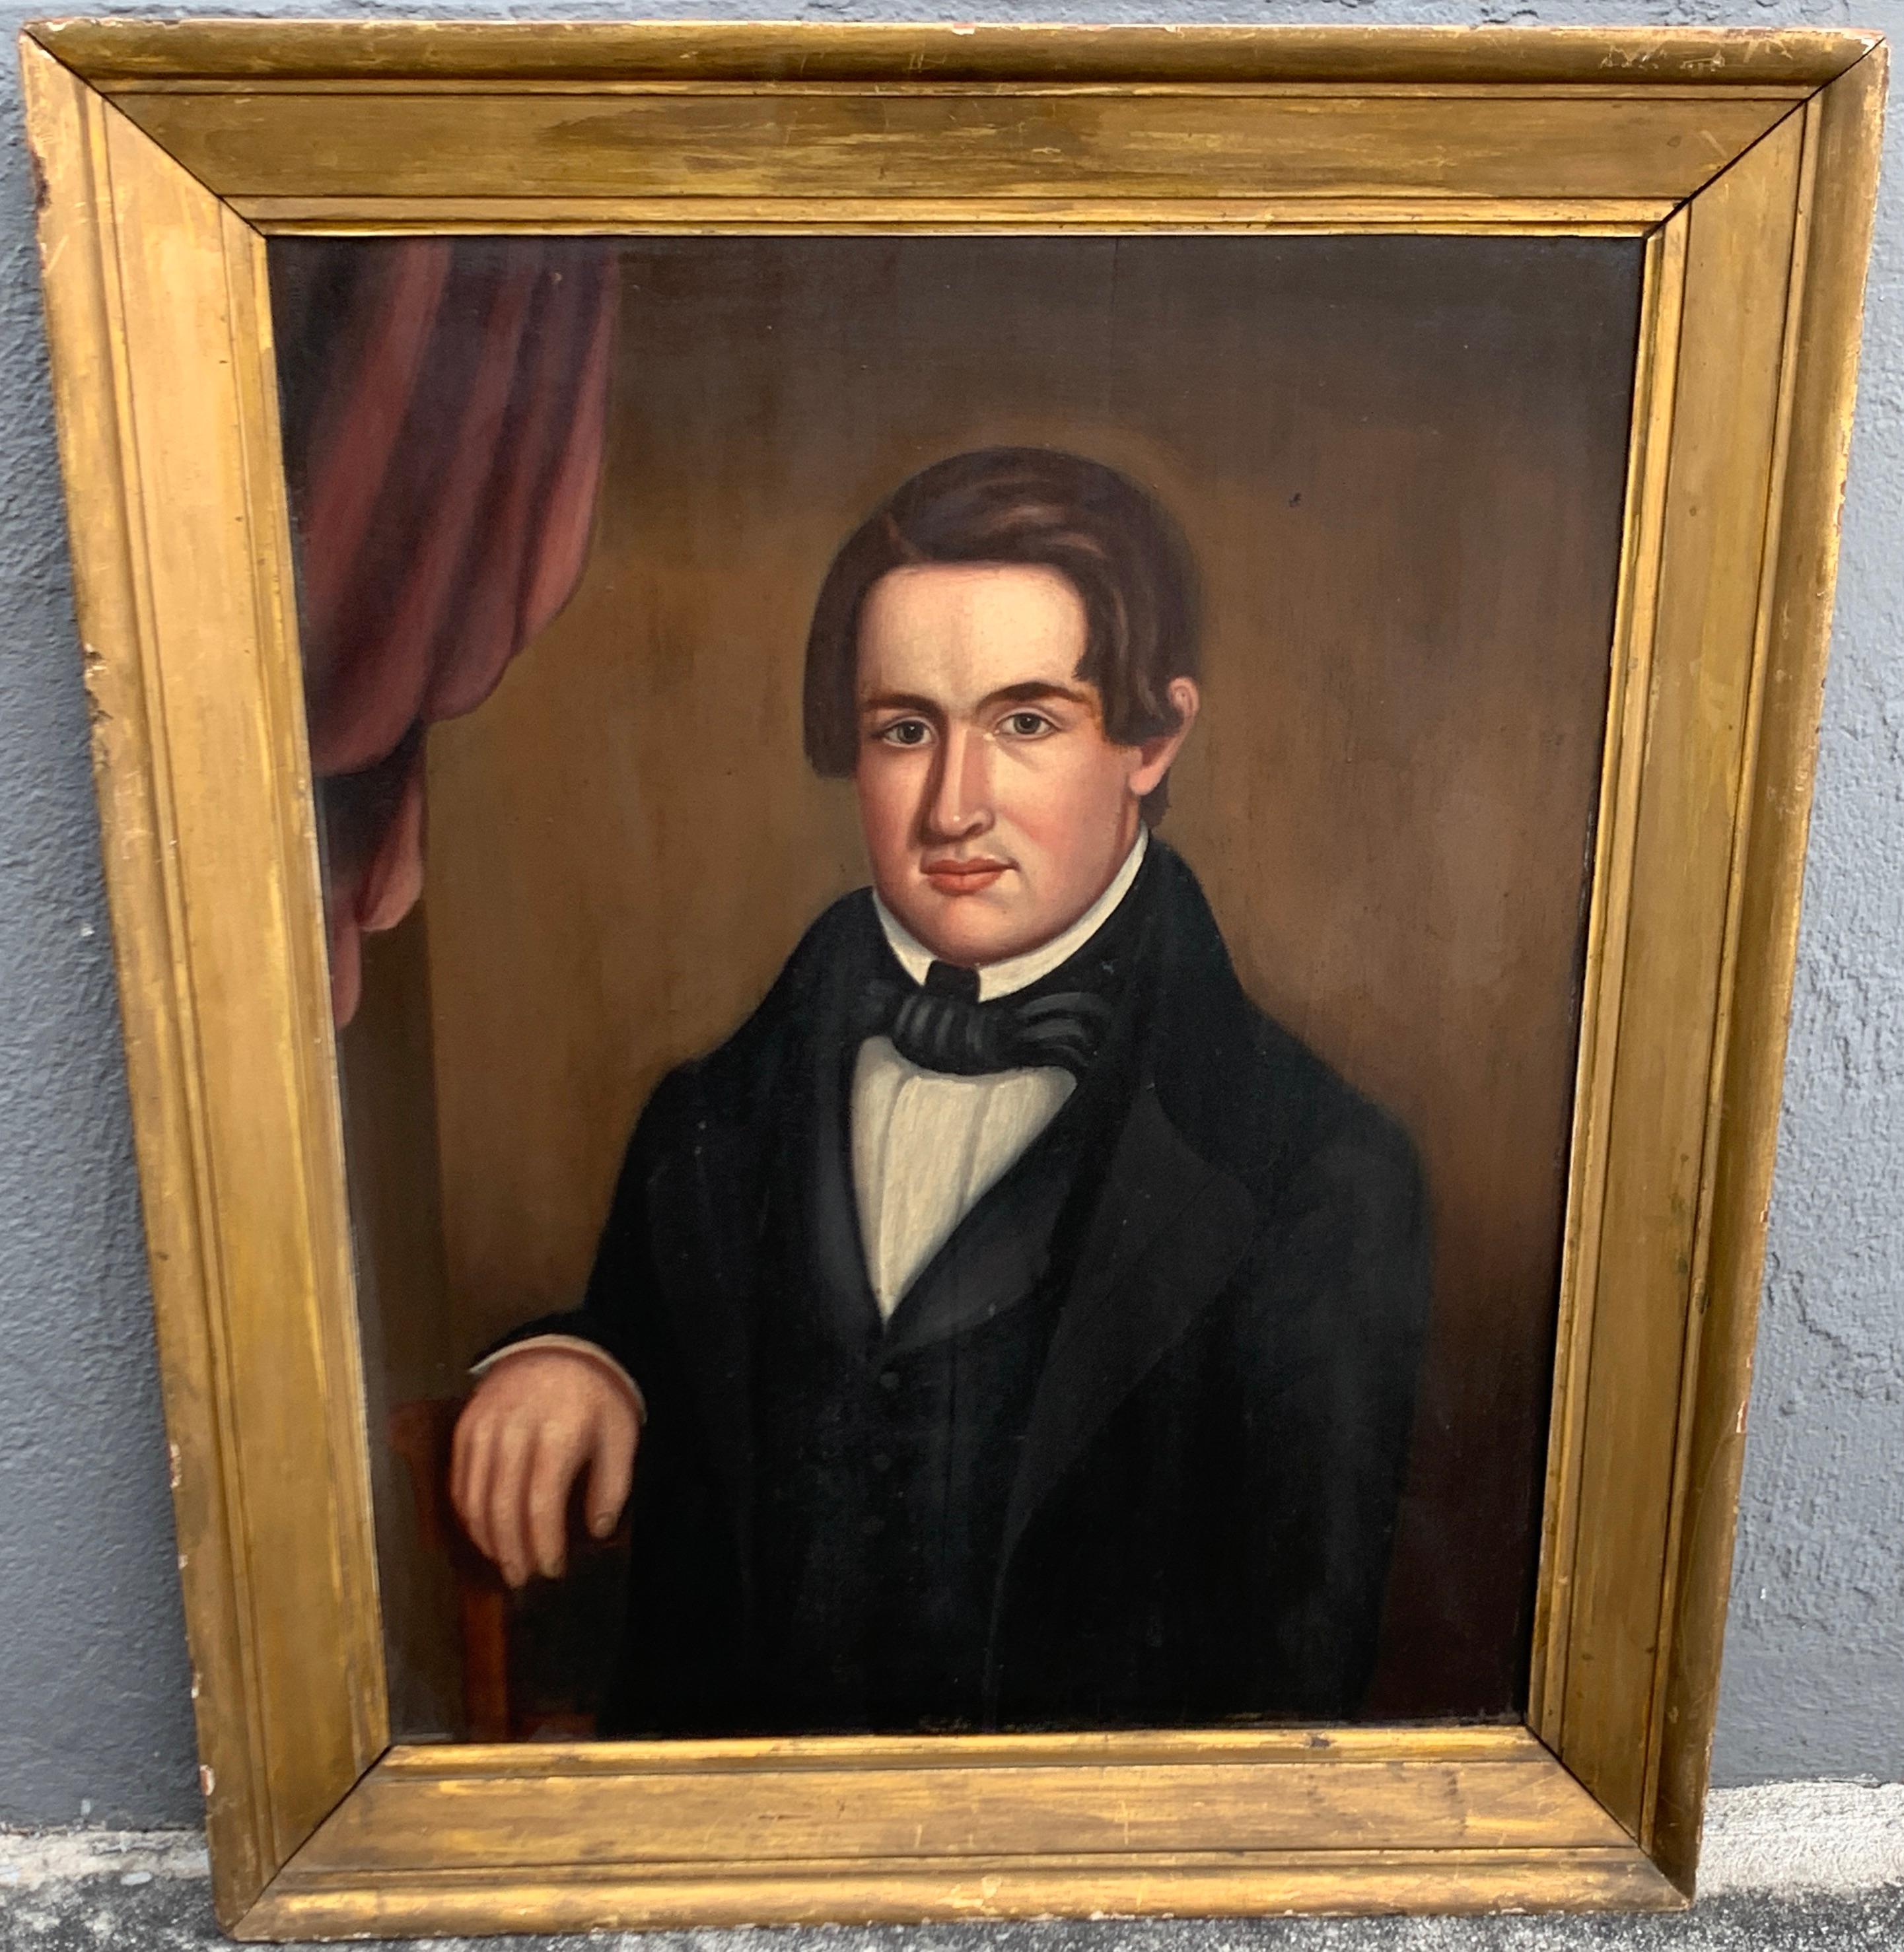 A fine 19th century American portrait of a NY Handsome Bachelor, Norman pearl, circa 1855
The handsome Mr. Pearl dressed in a black suit and white shirt, seated in a draped setting with his right hand raised. Apparently unsigned. Retains original